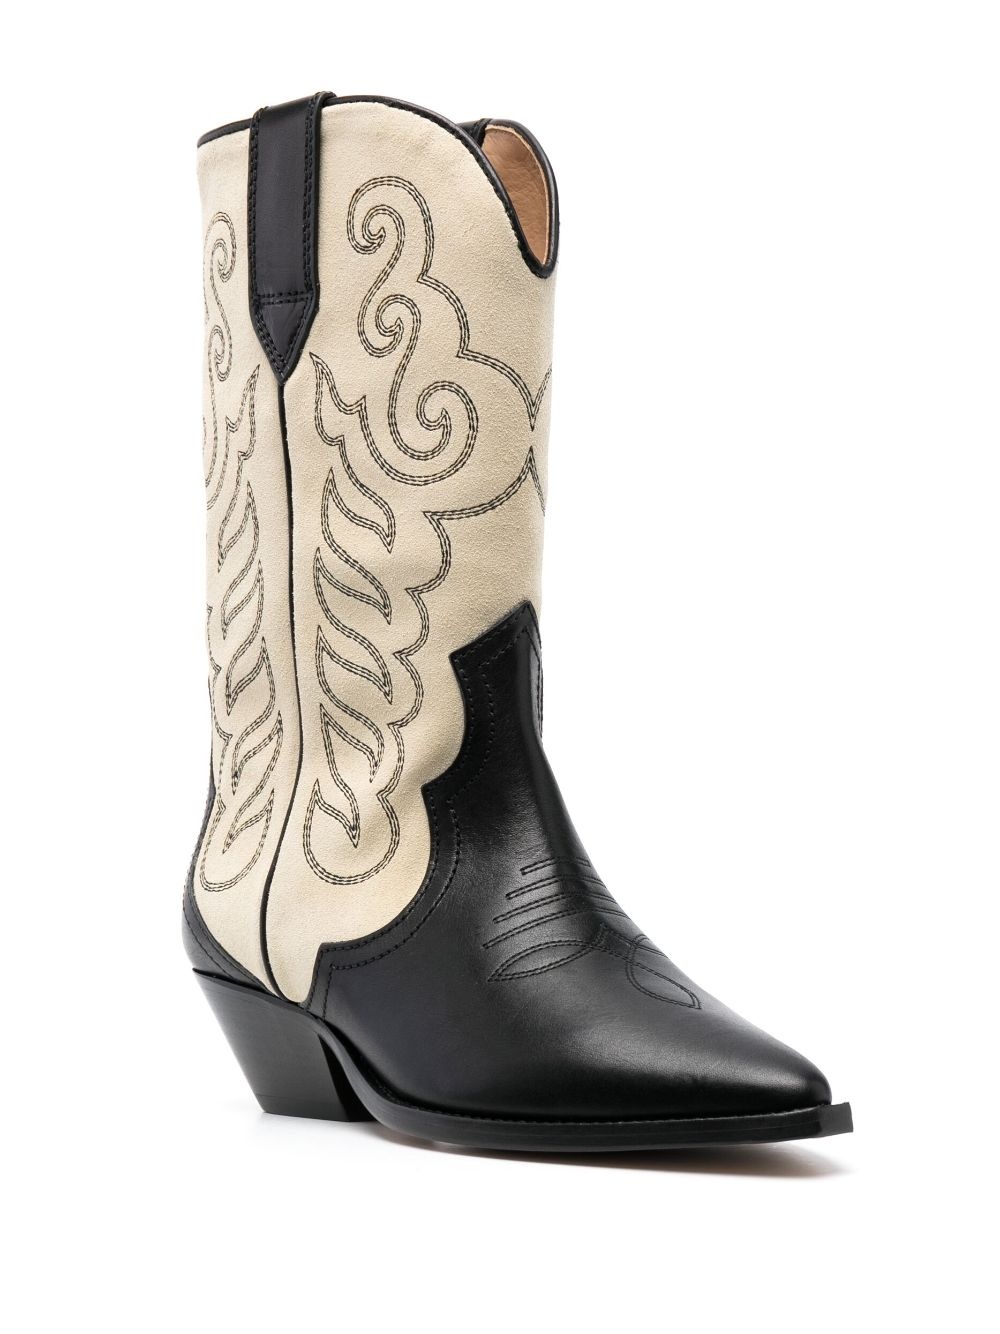 40mm two-tone leather western boots - 2